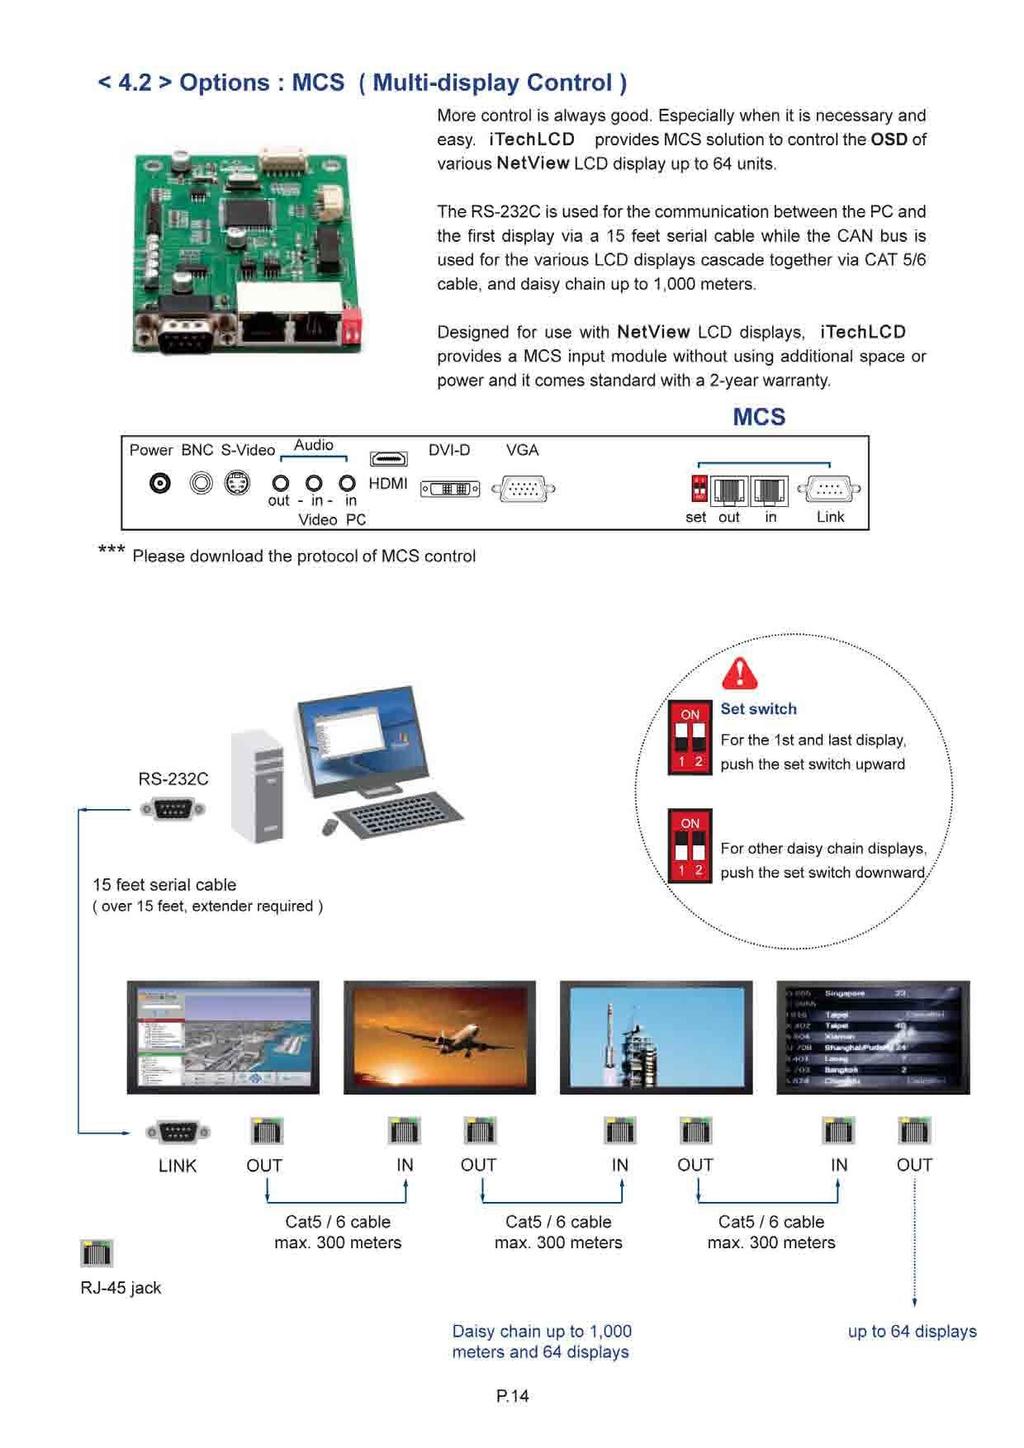 < 4.2 > Options : MCS ( Multi-display Control) More control is always good. Especially when it is necessary and easy.